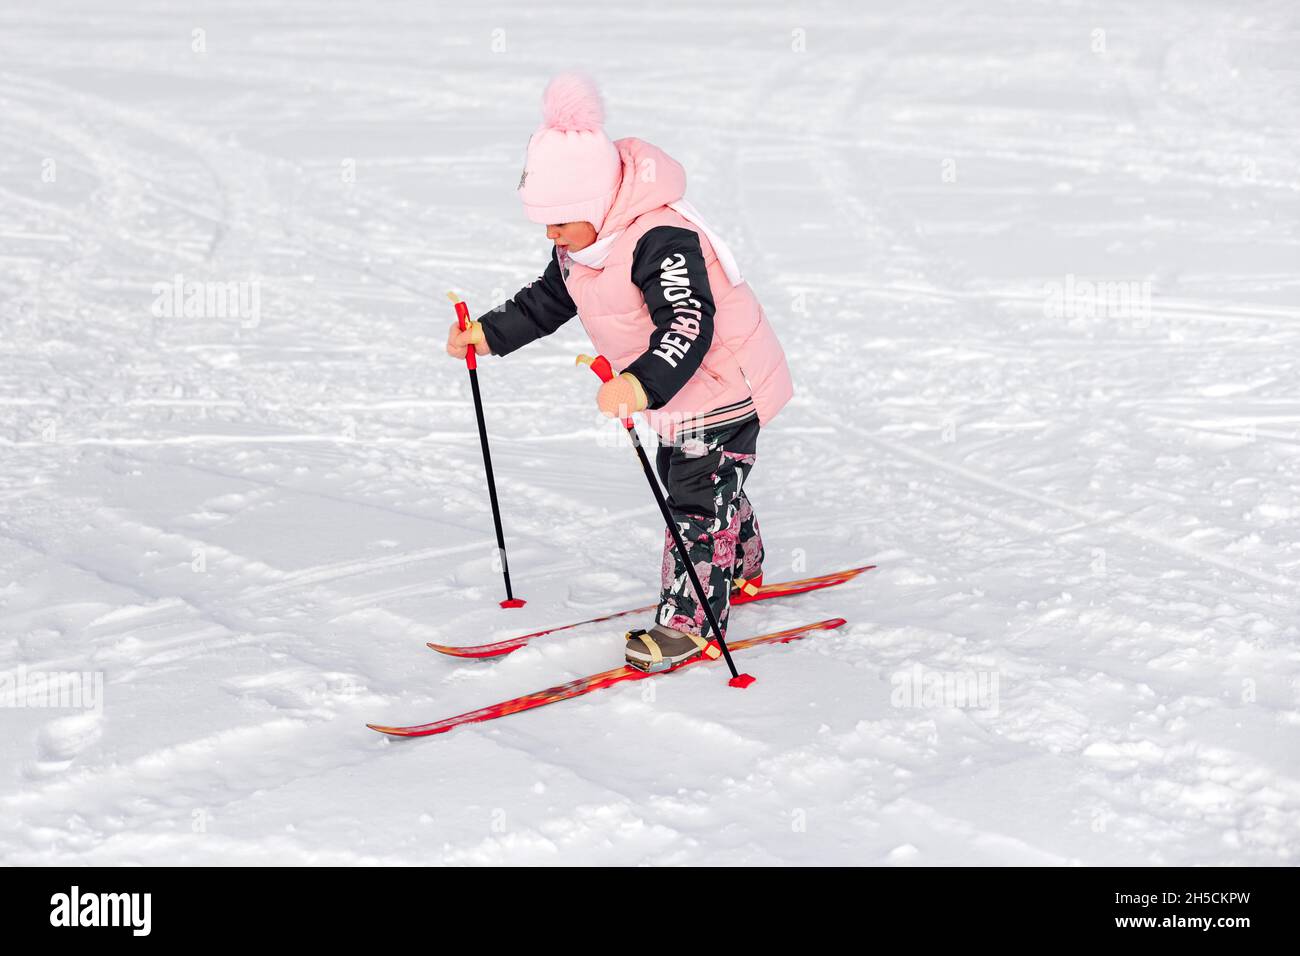 Little girl is skiing. Child in pink warm suit learns to ski on snow-covered road, winter landscape, snow background Stock Photo